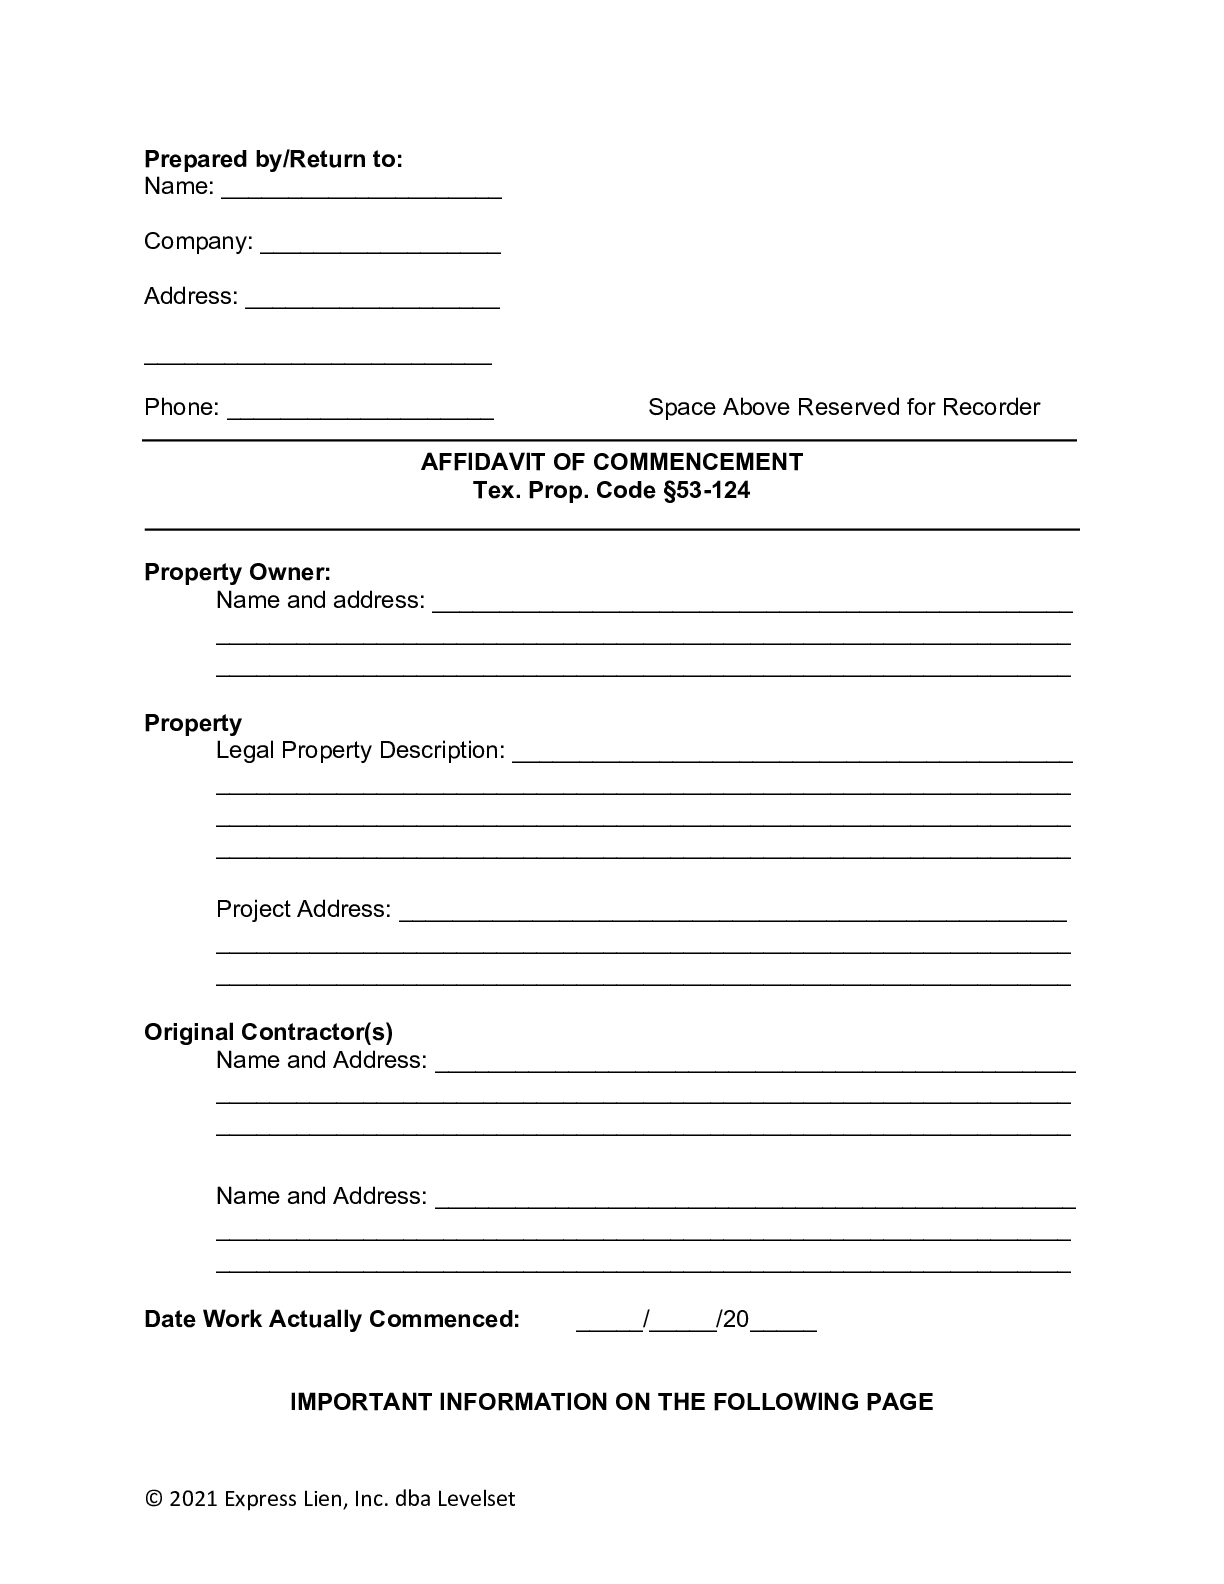 Texas Affidavit of Commencement Form - free from